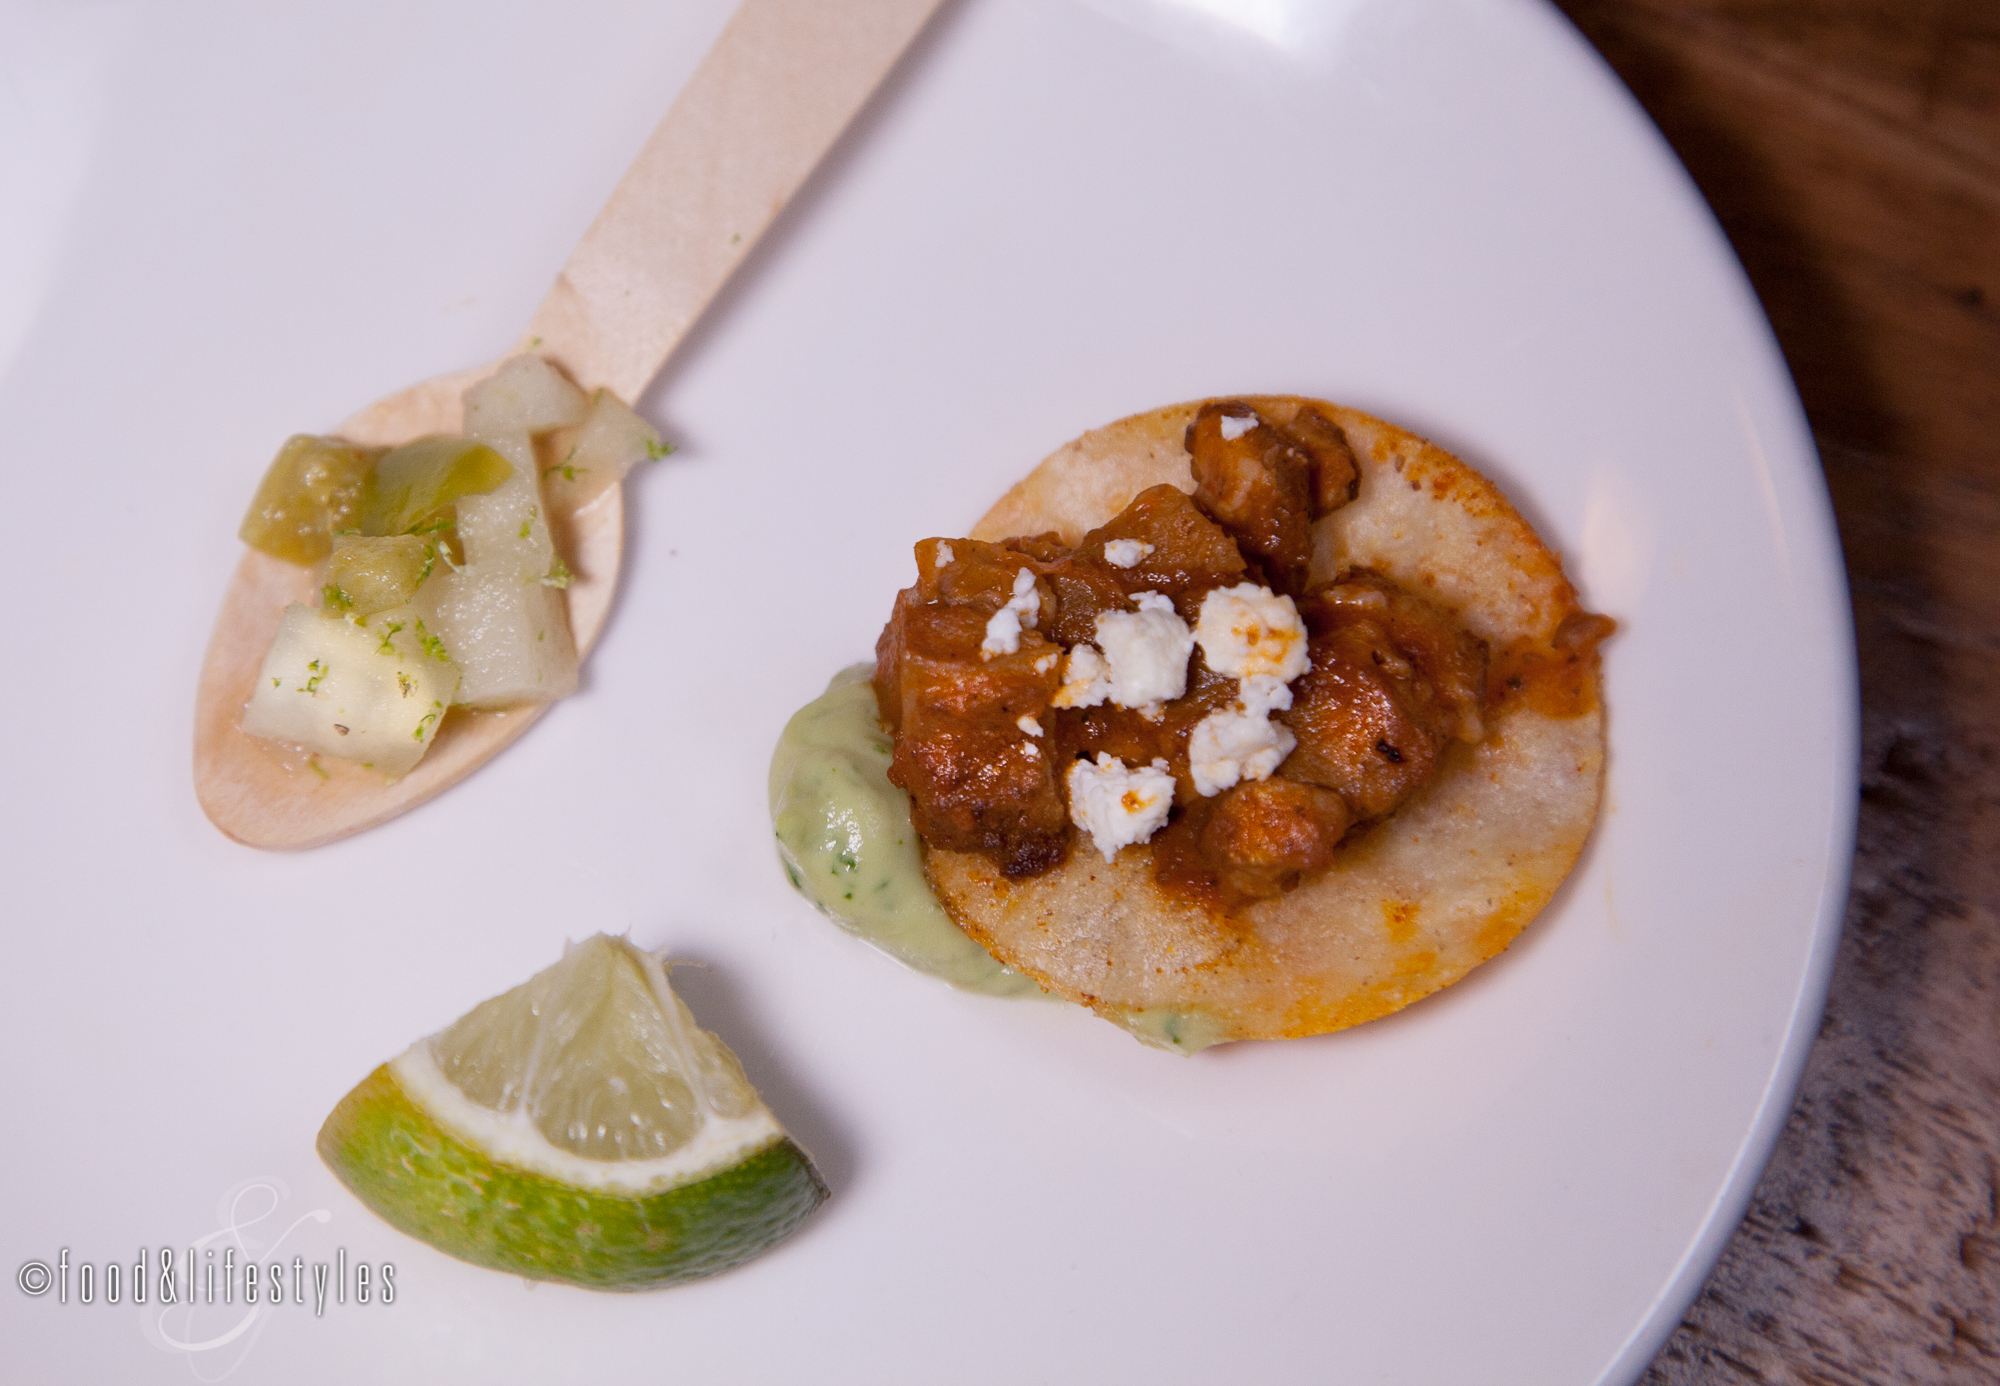 Lamb tostadas with smoked goat cheese and  tomatillo-apple salsa 